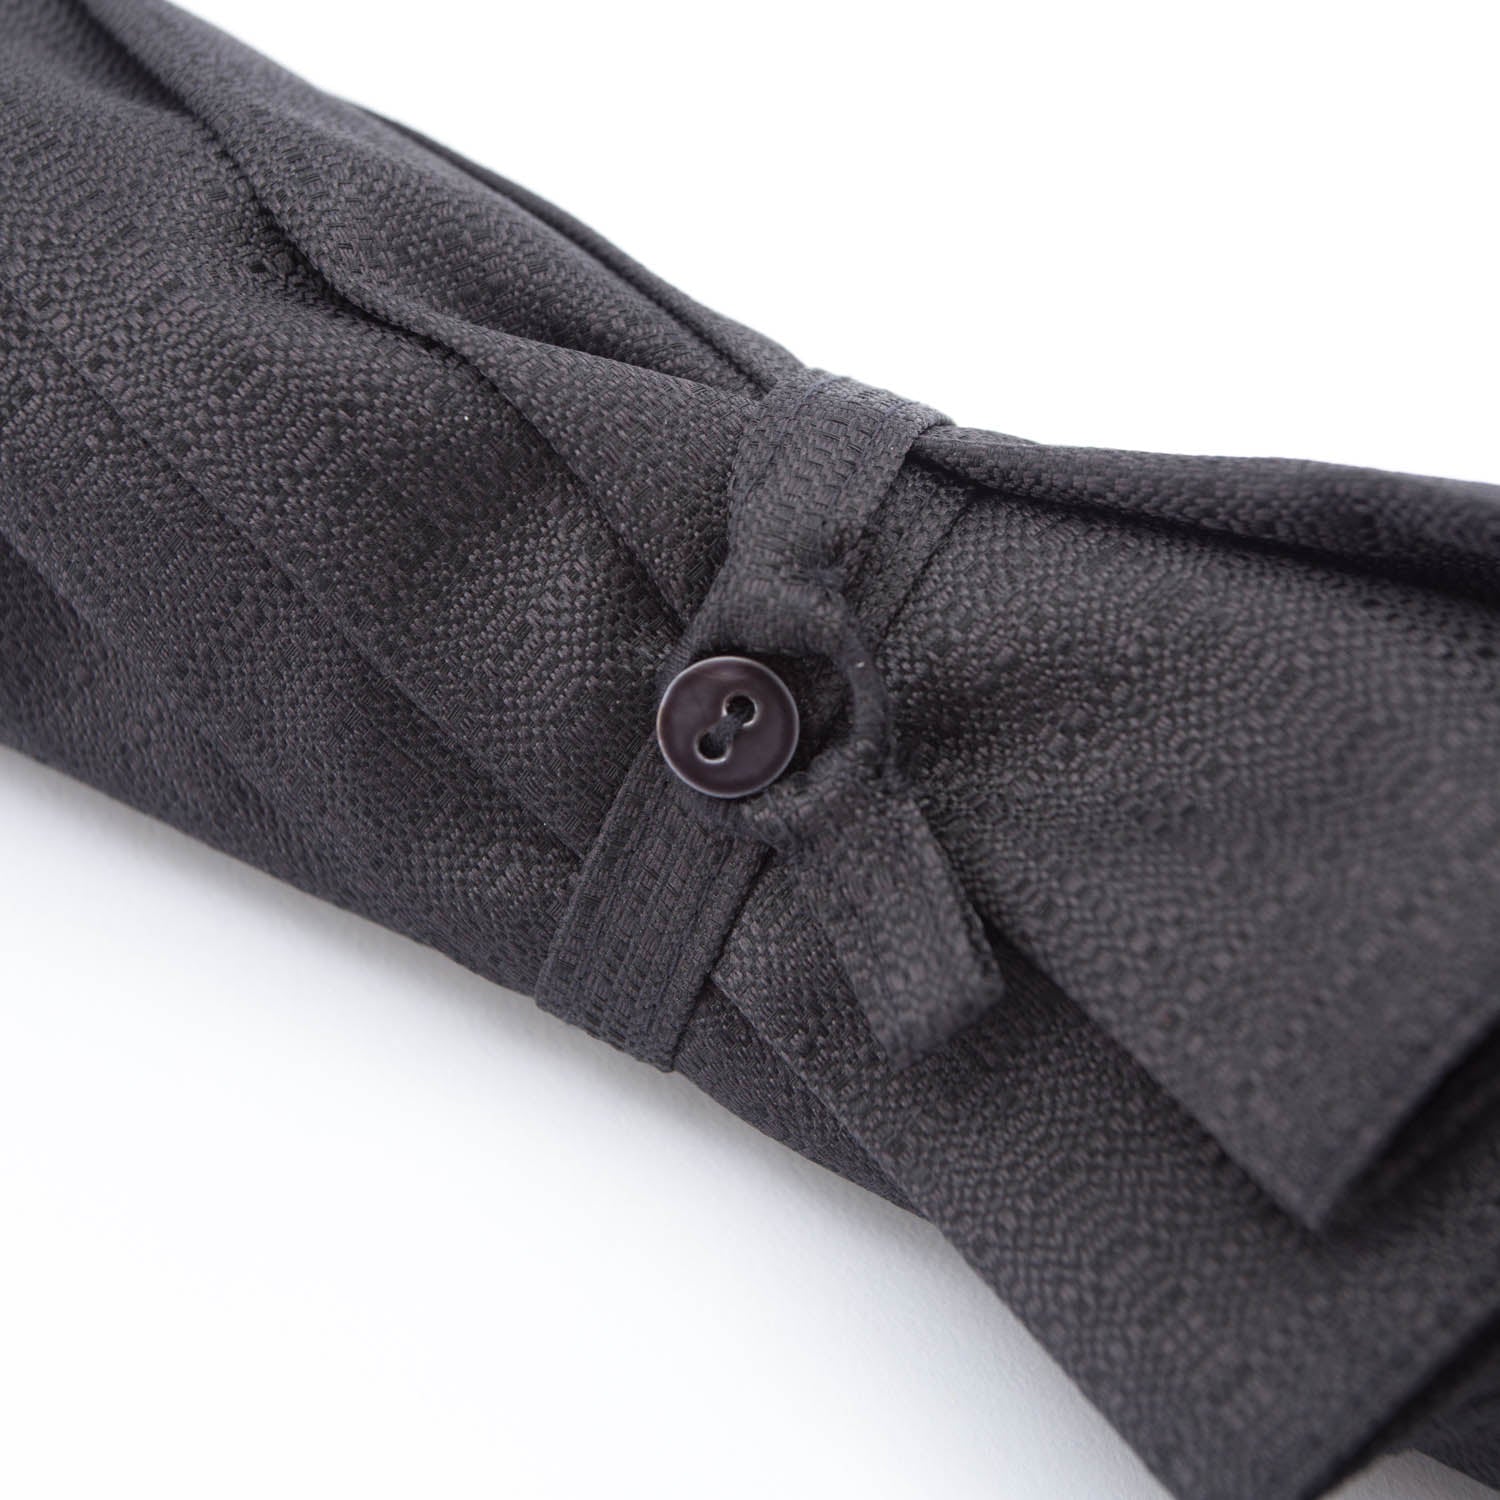 A Imperial Black Travel Umbrella with Woven Leather Handle from KirbyAllison.com.